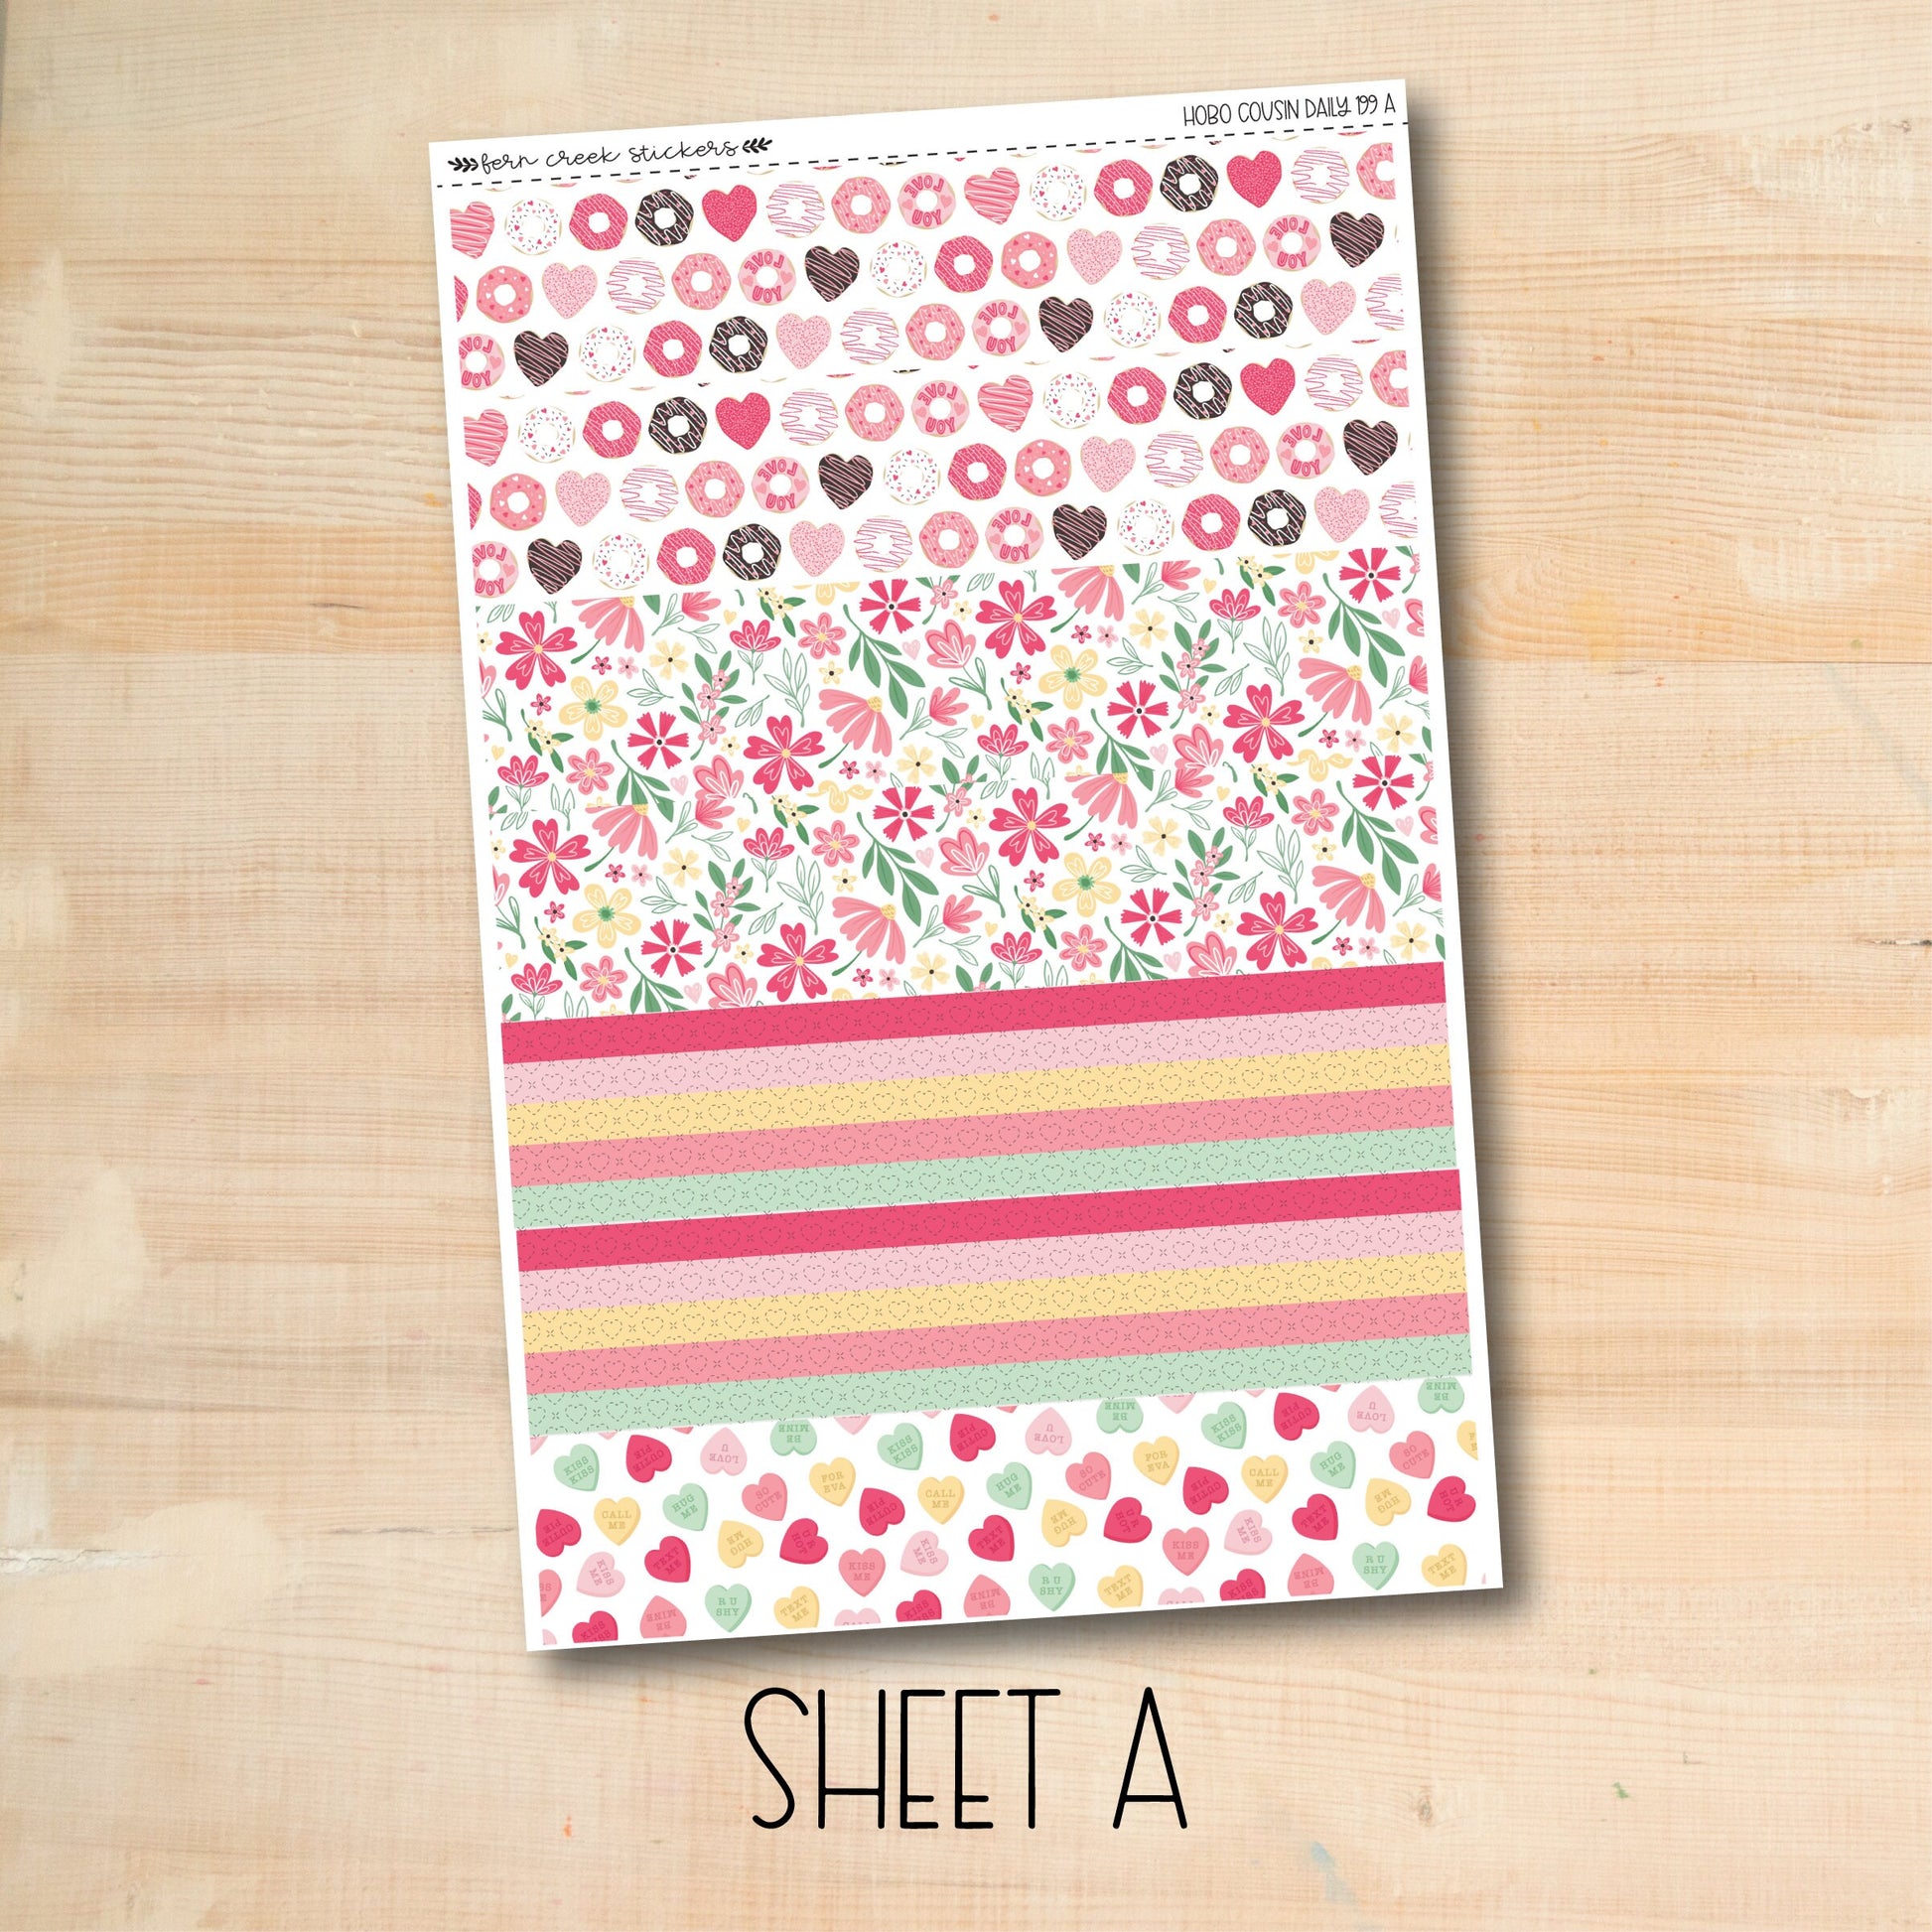 a sheet of paper with hearts and flowers on it